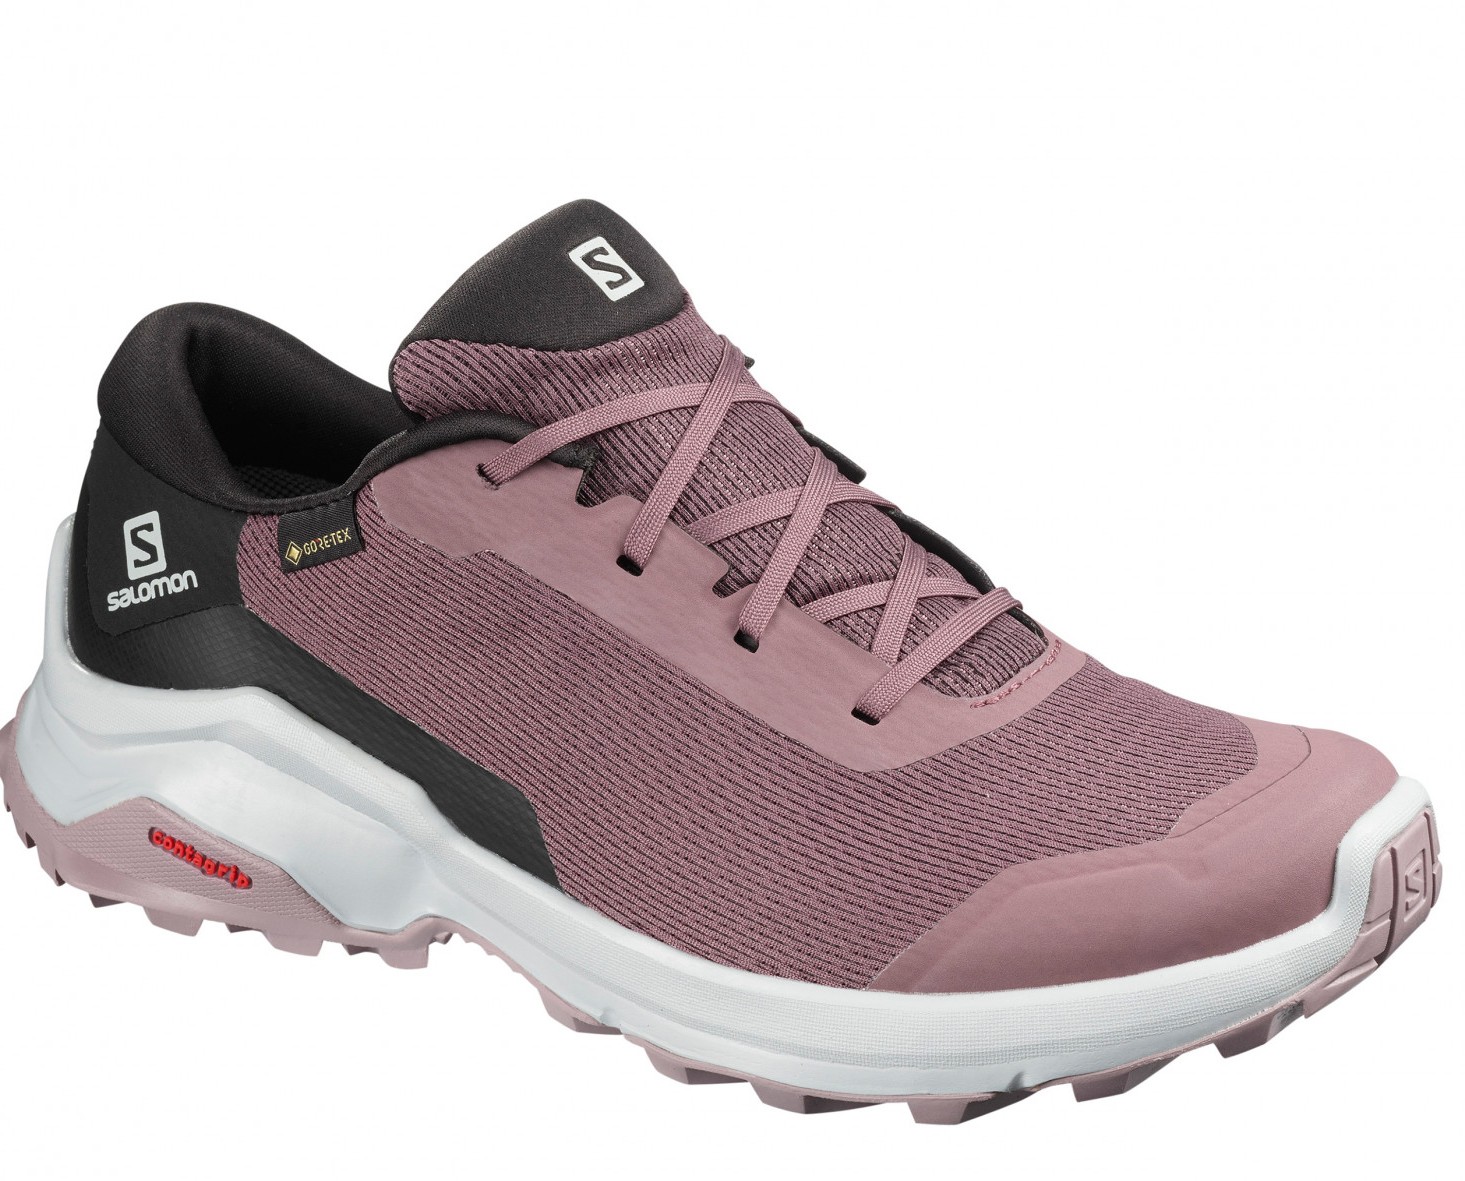 To seek refuge earphone wide Top-rated Salomon walking shoes are a huge £26 off on Amazon 